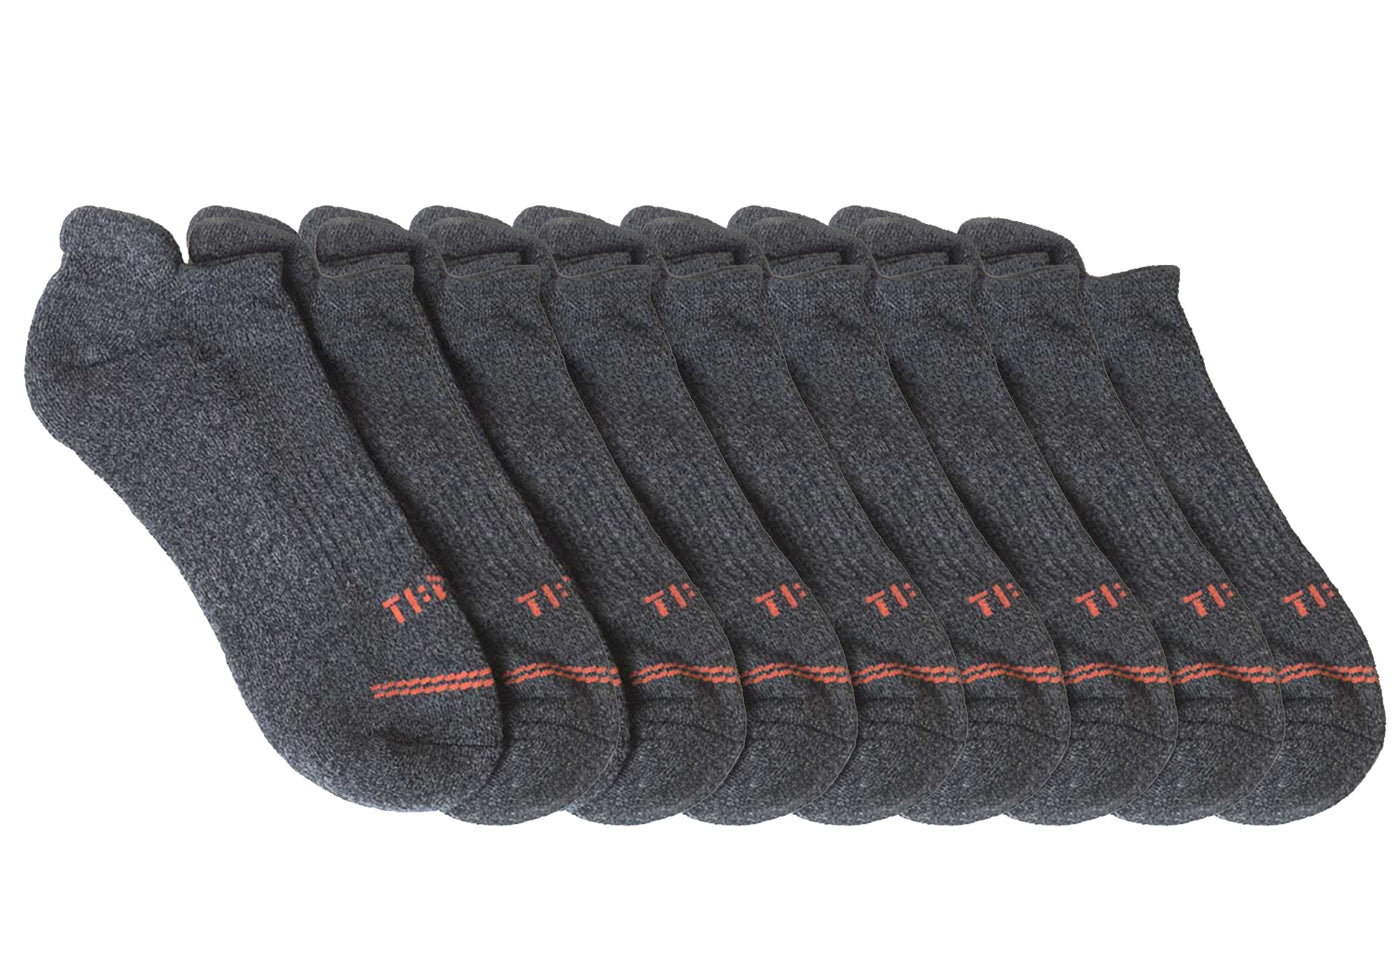 TIME Comfort Socks (unisex) - Ankle Socks - 8 Pack / Small by TIME Slippers